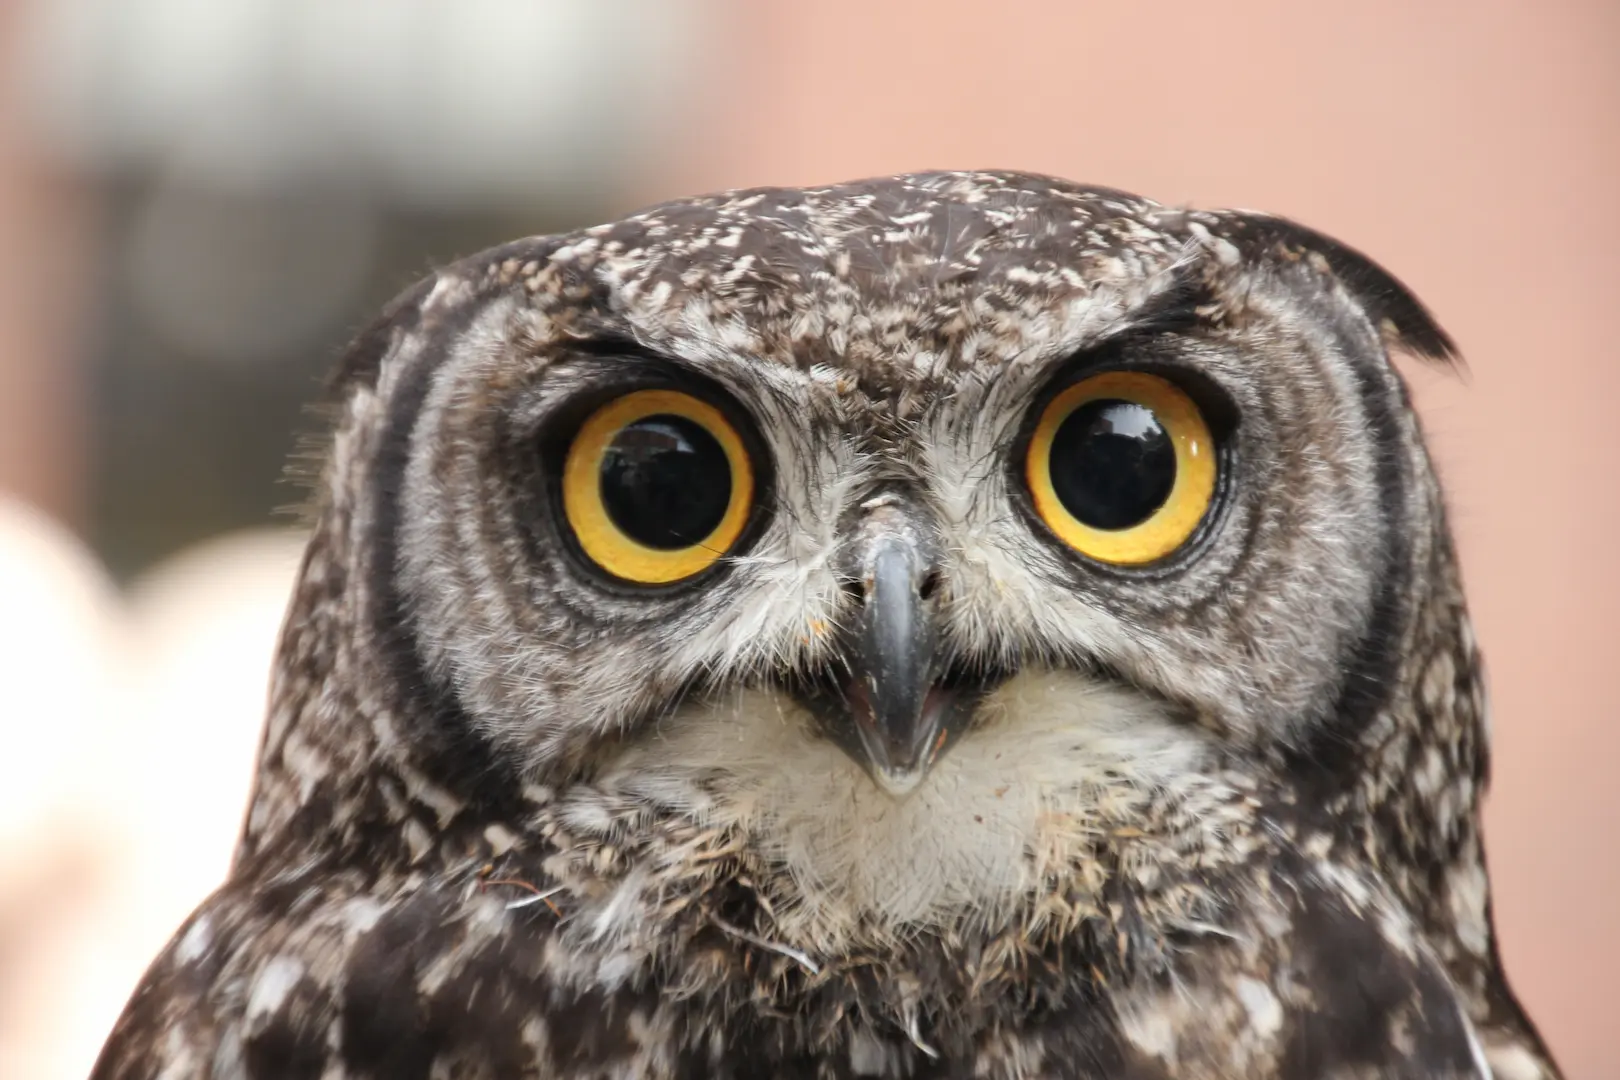 Owl starring at you